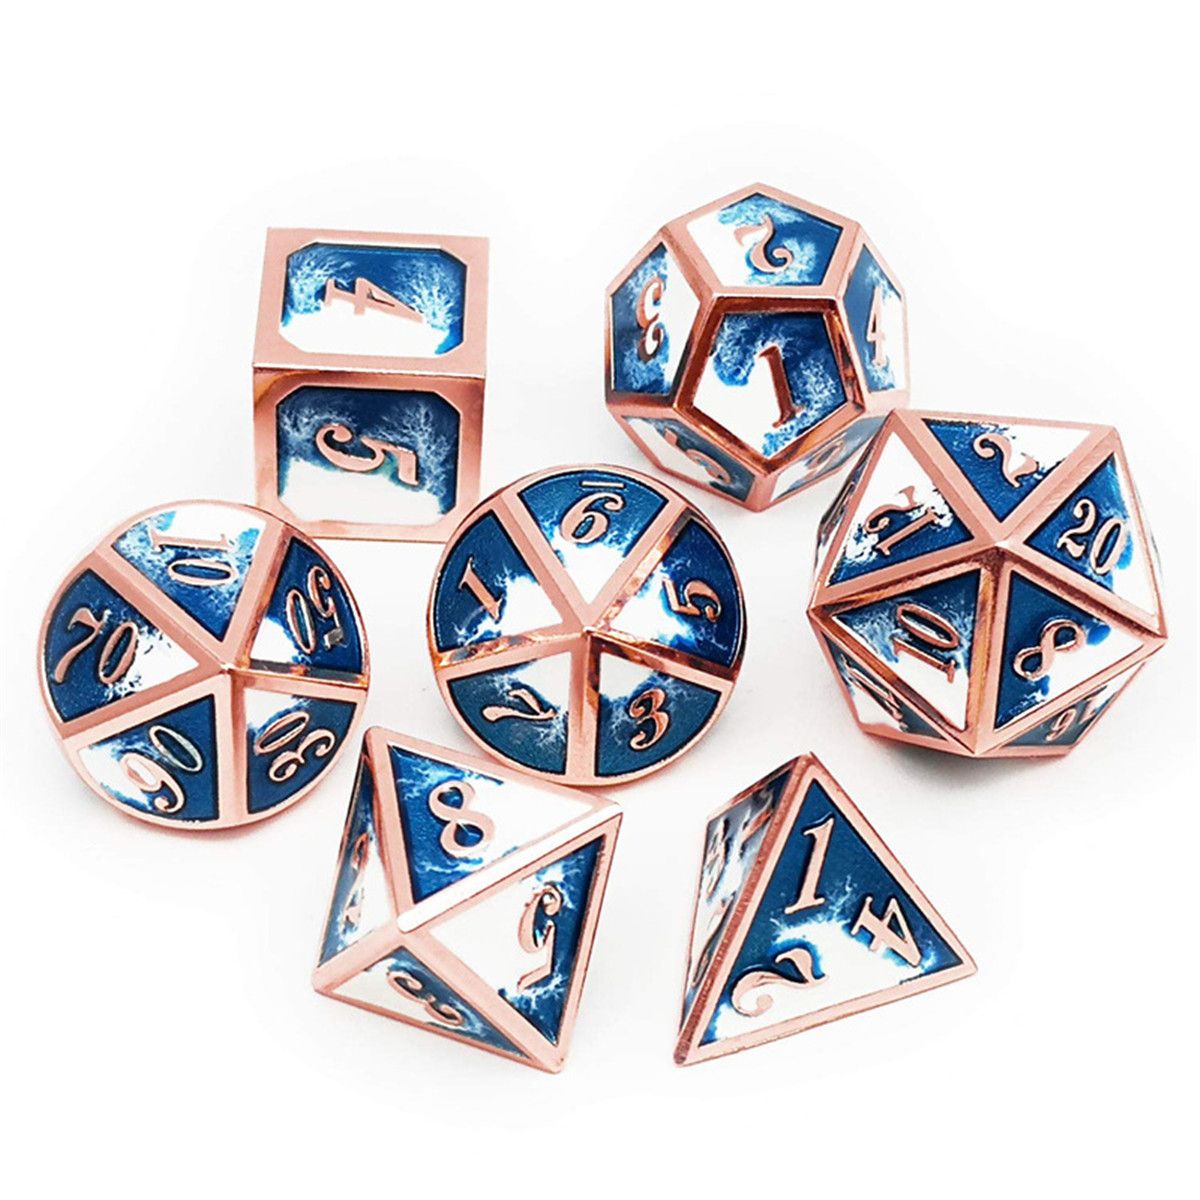 7pcs-Polyhedral-Dice-Zinc-Alloy-Dice-Set-Heavy-Duty-Dices-For-Role-Playing-Game-Dice-Set-1590750